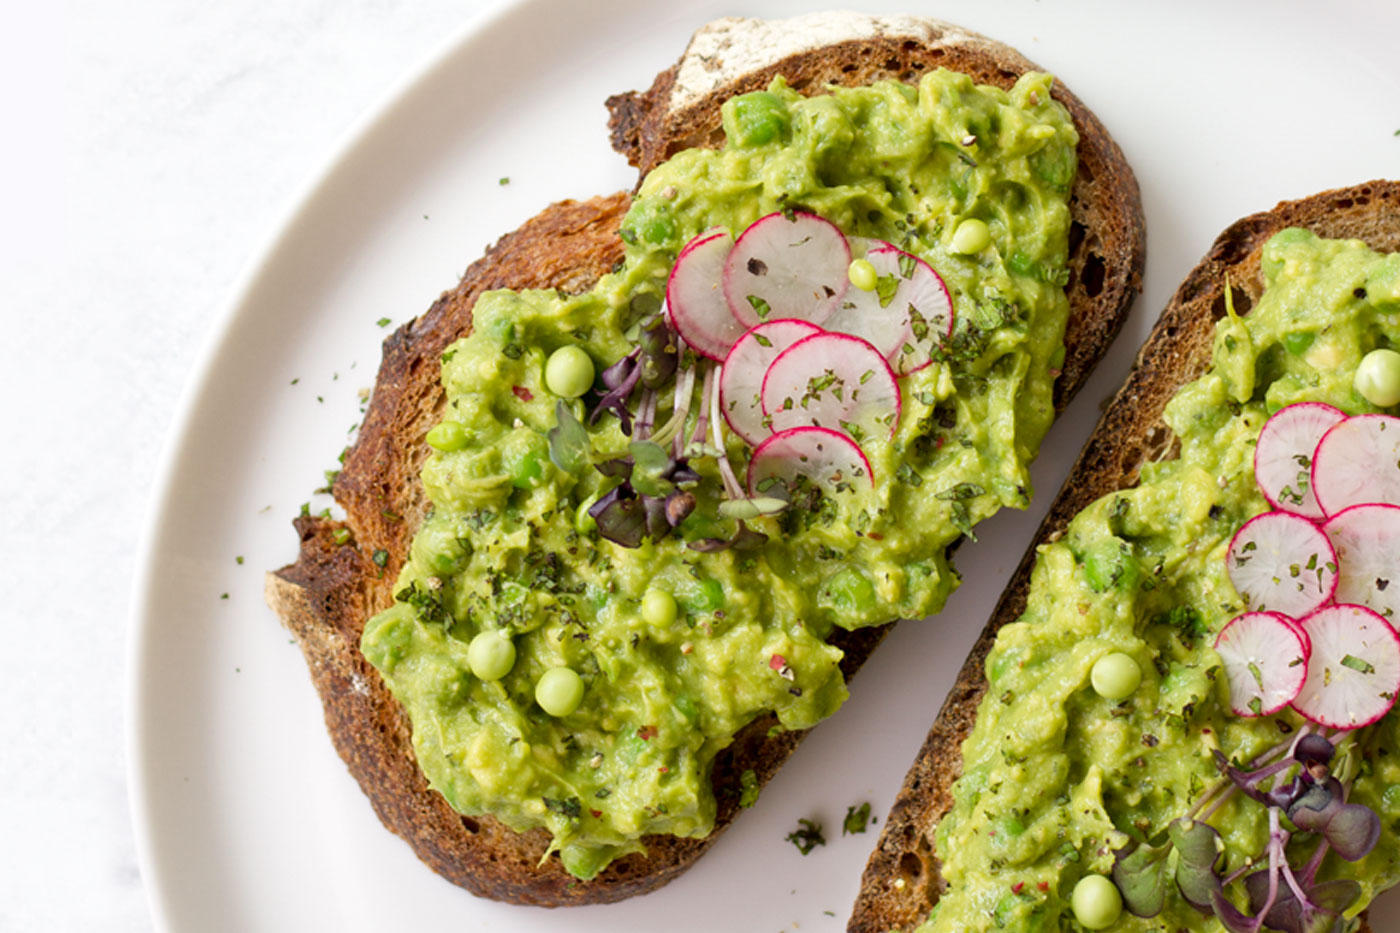 This is a avocado and pea smash recipe made by Active Vegetarian